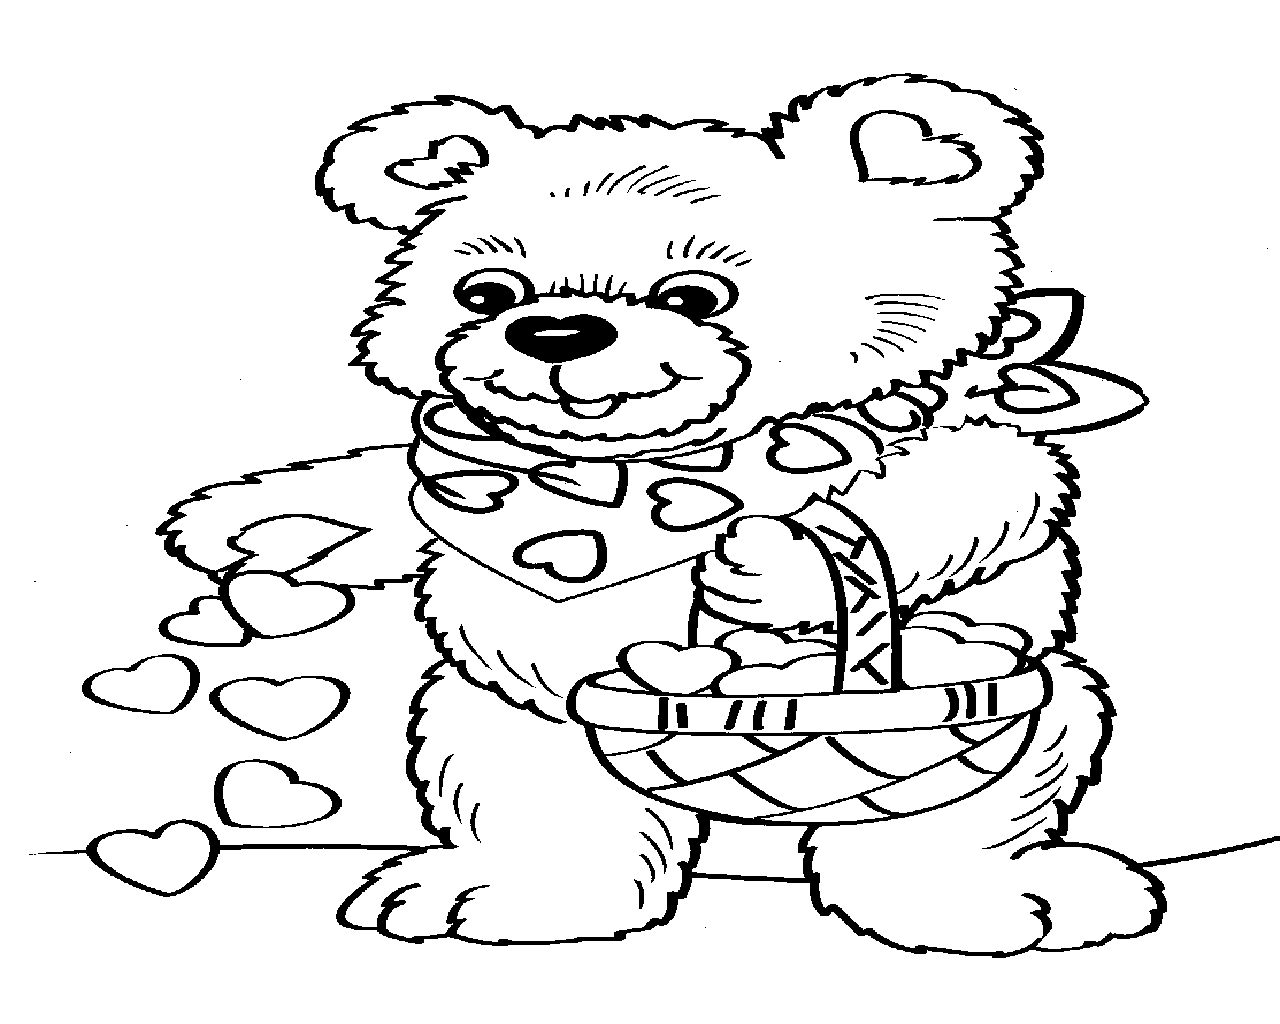 Valentine Teddy Bear Coloring Pages Coloring Pages Free Printable Valentine Coloring Pages For Kids